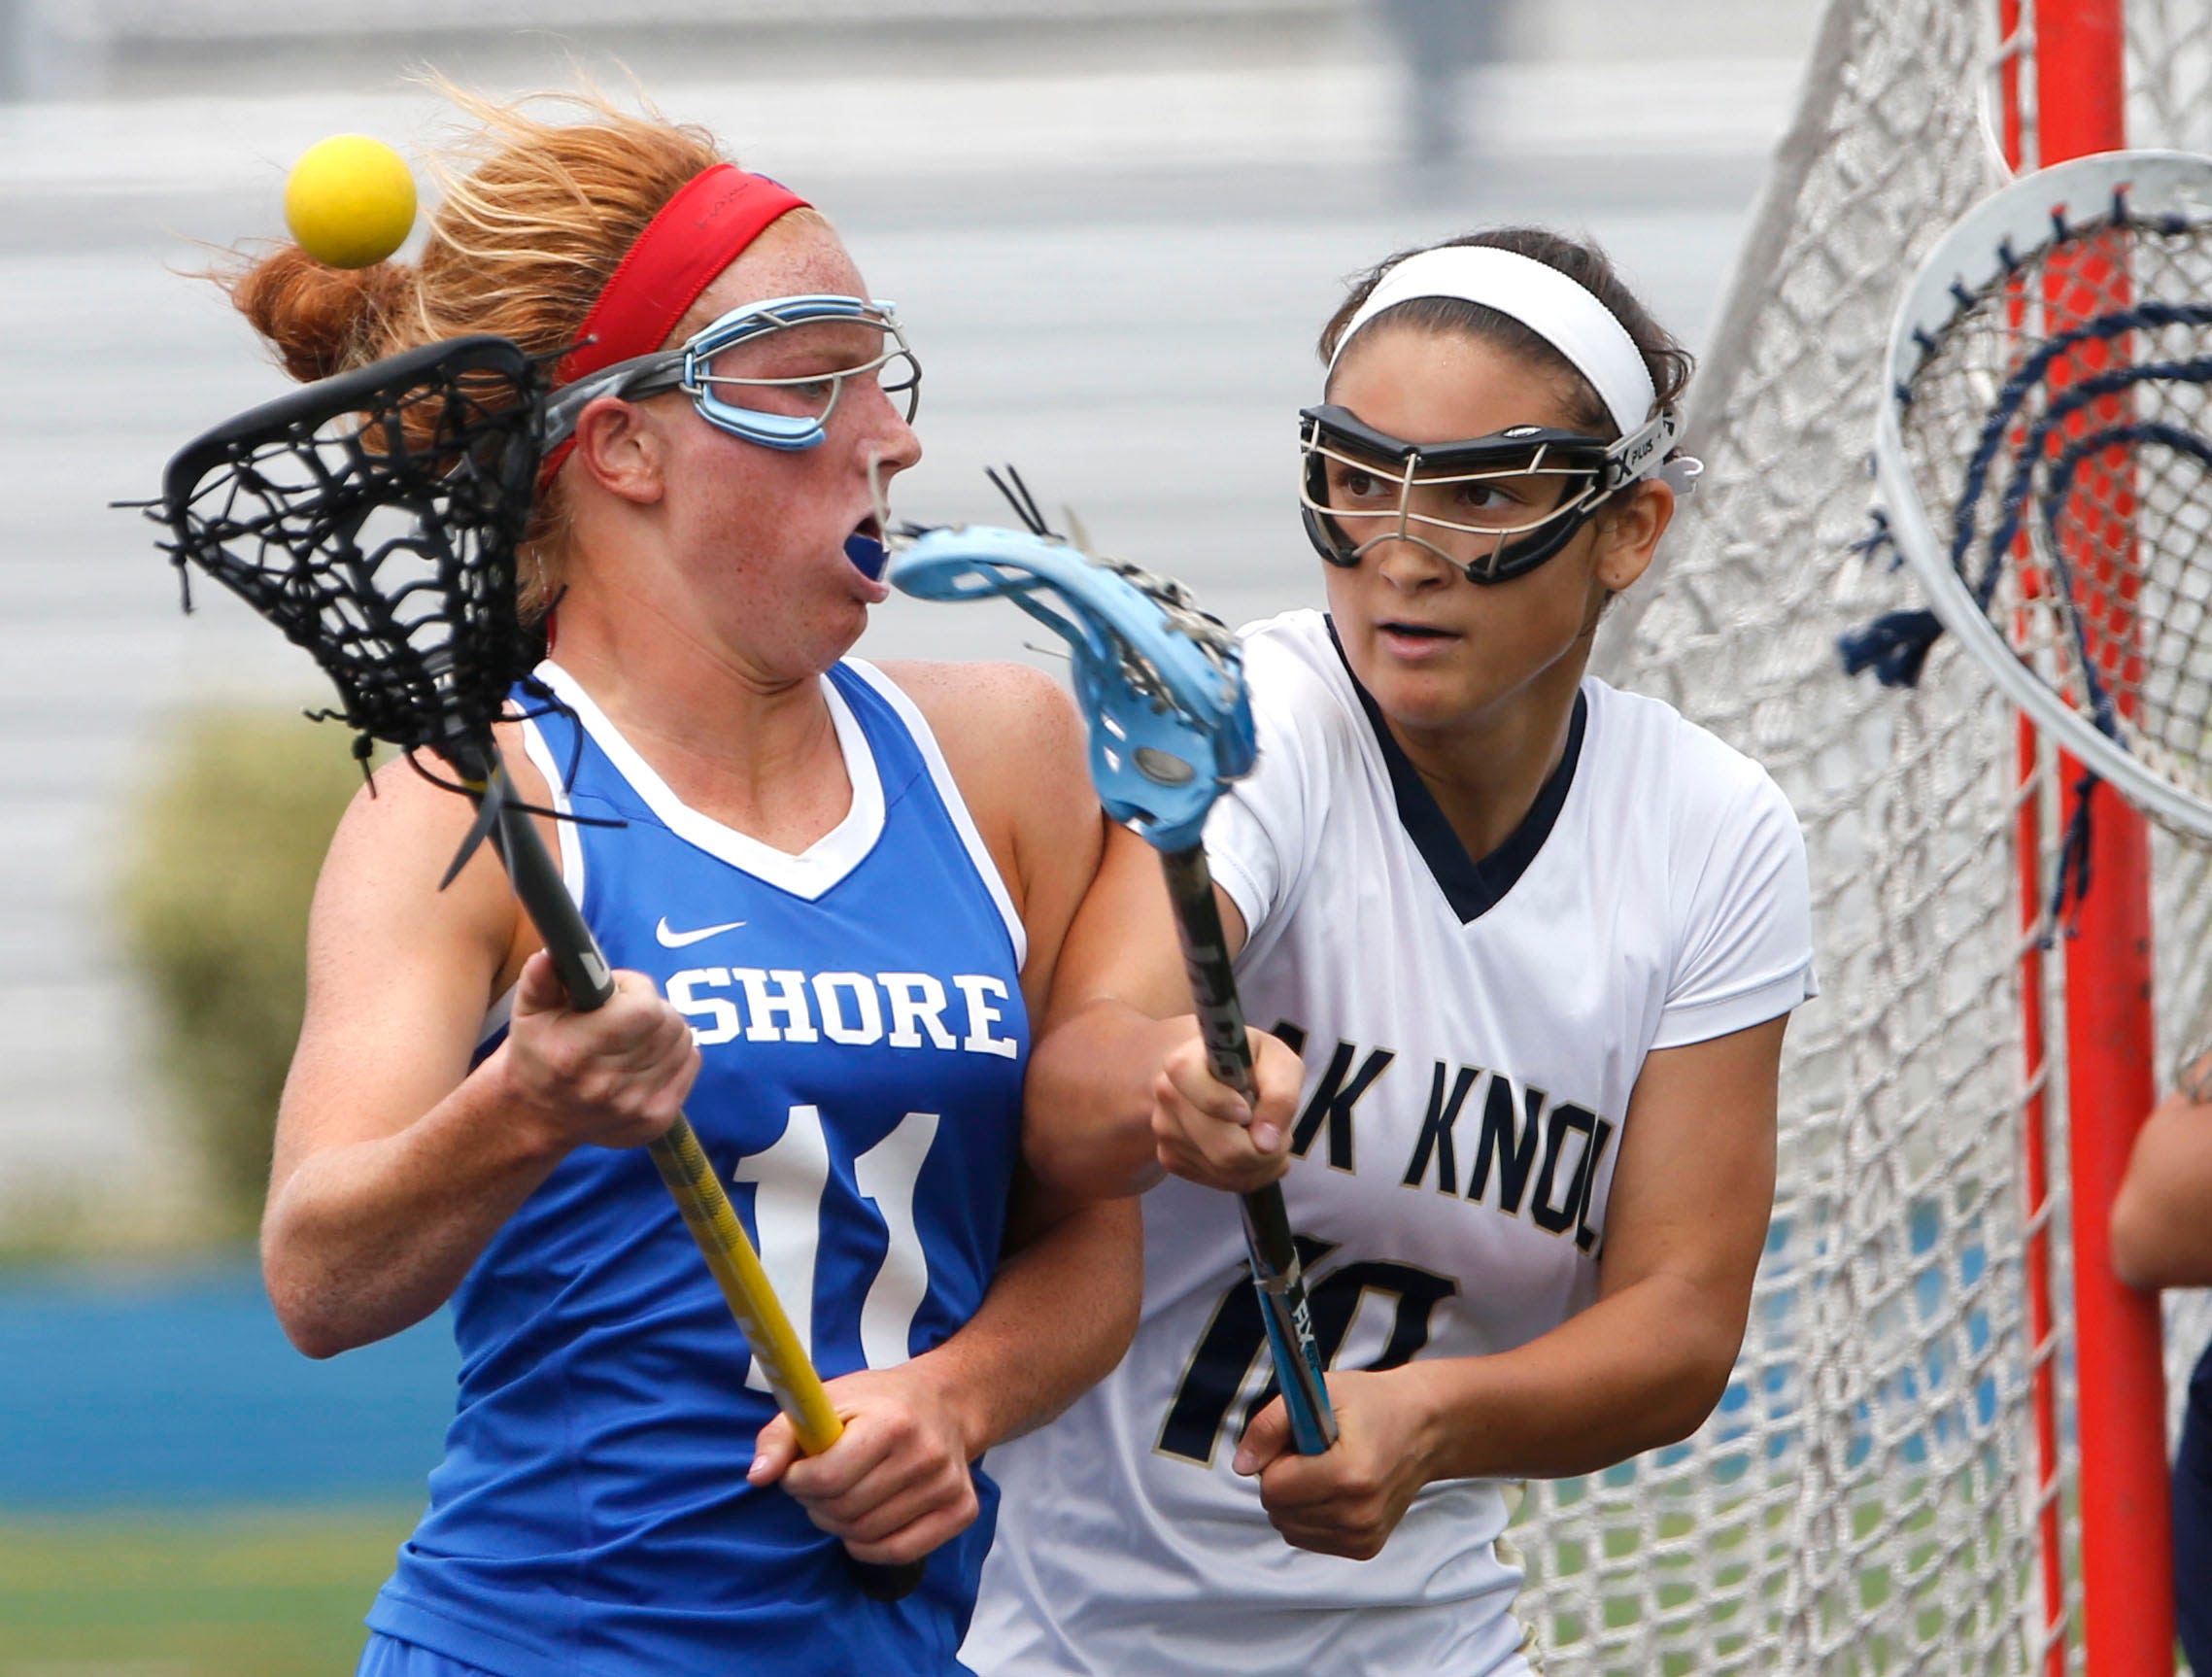 46 Shore girls lacrosse players have scored 215 goals in their careers. Here's the full list